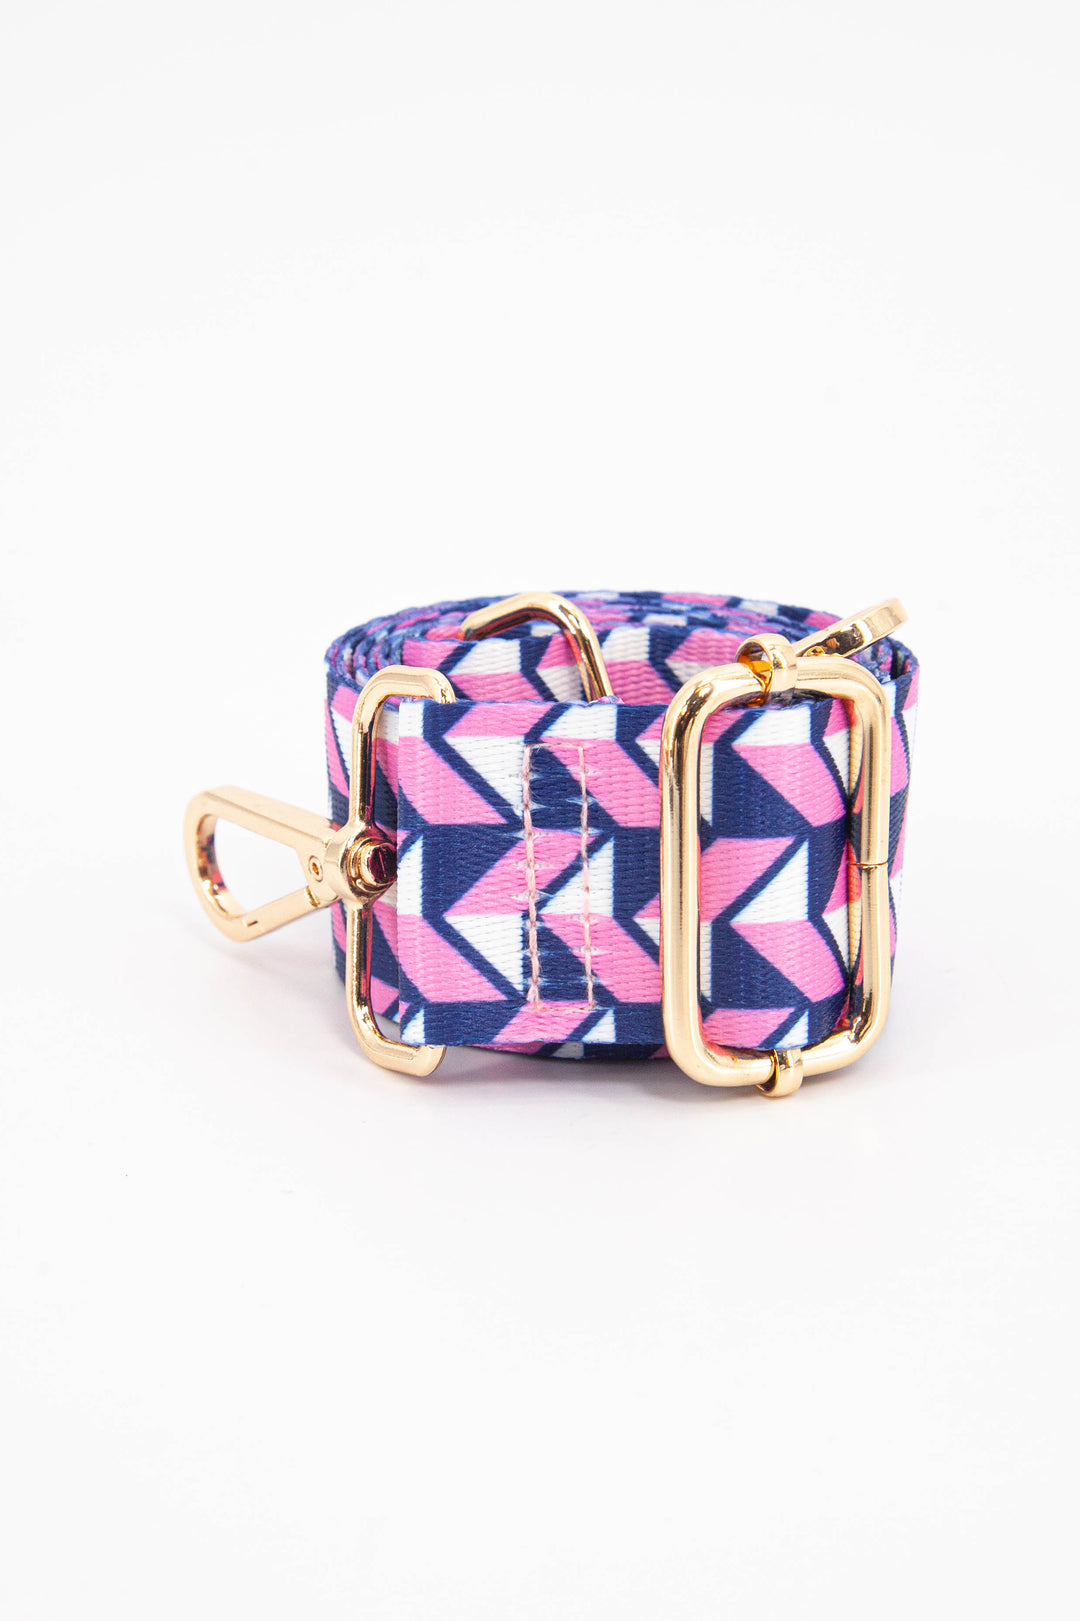 close up of the pink and navy blue geometric chevron pattern and gold adjustment buckle